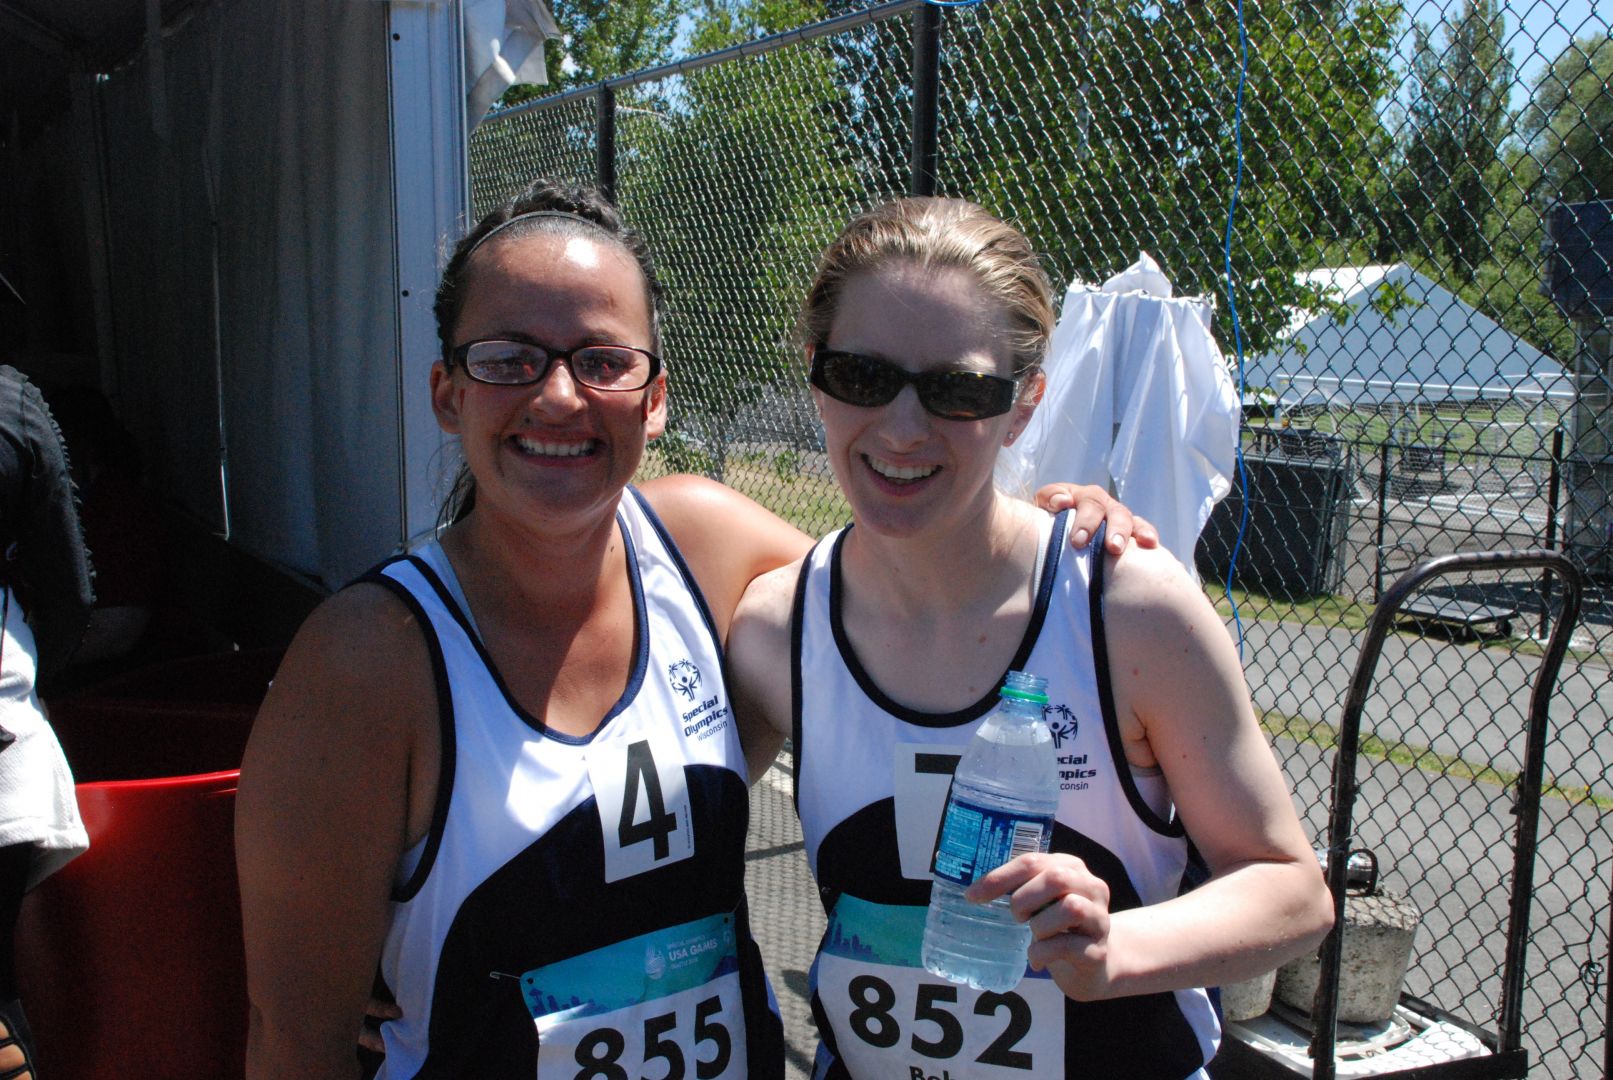 Crystal Fougner (L) and Lora Behr right after their 100-meter dash